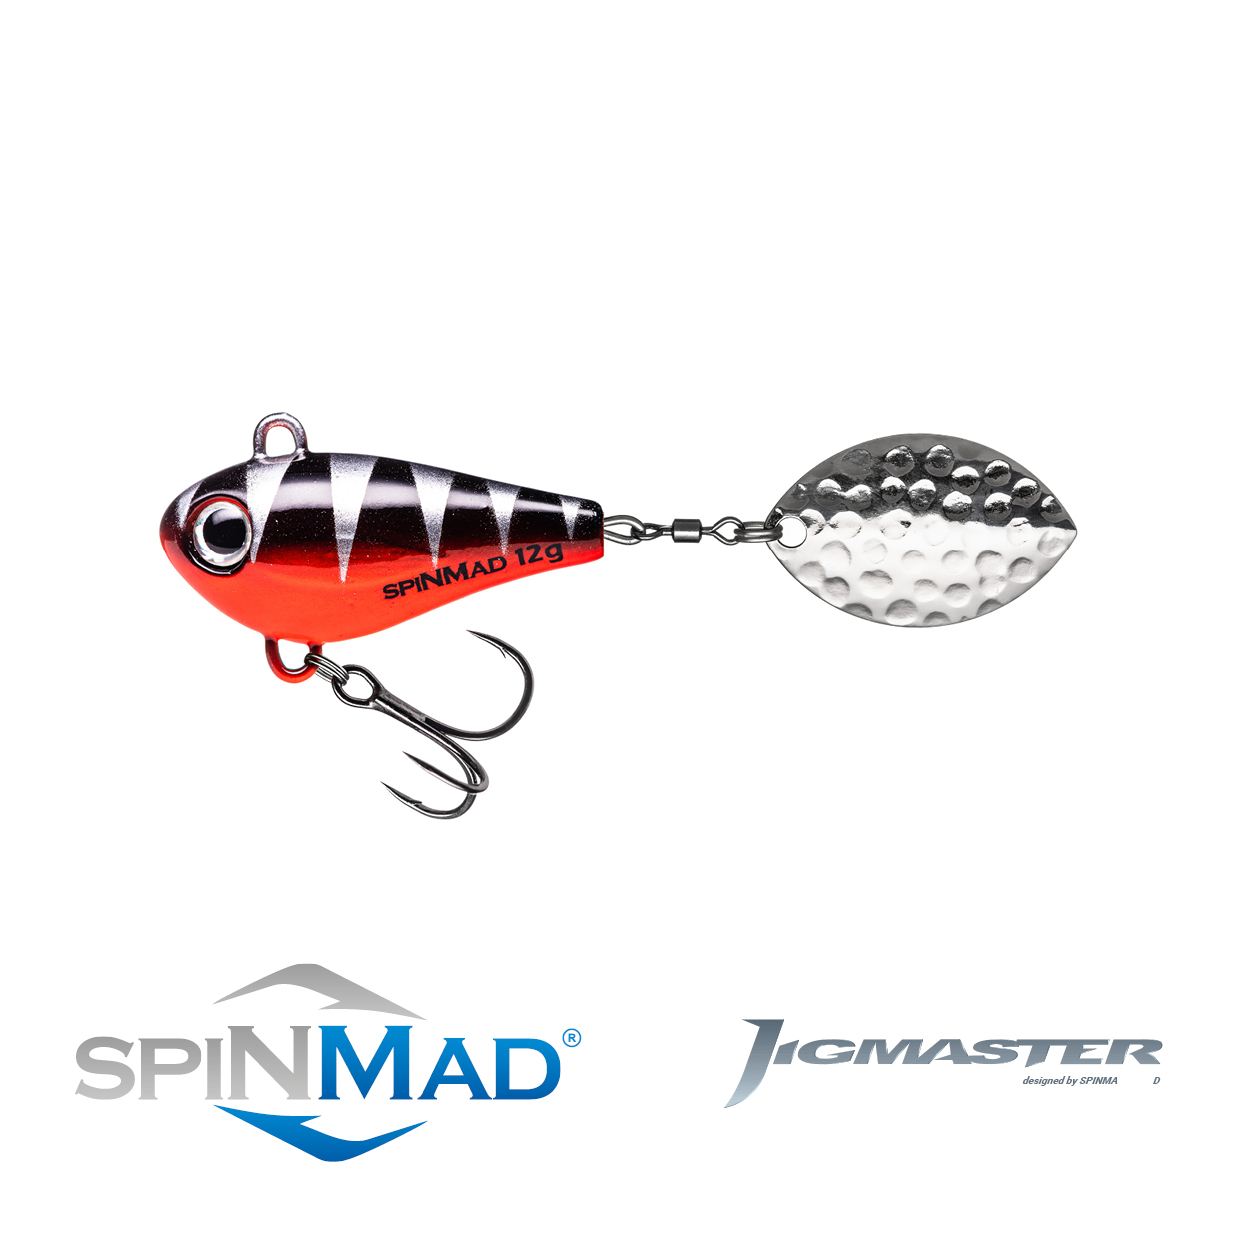 Spinmad jigmaster 12g color 1409